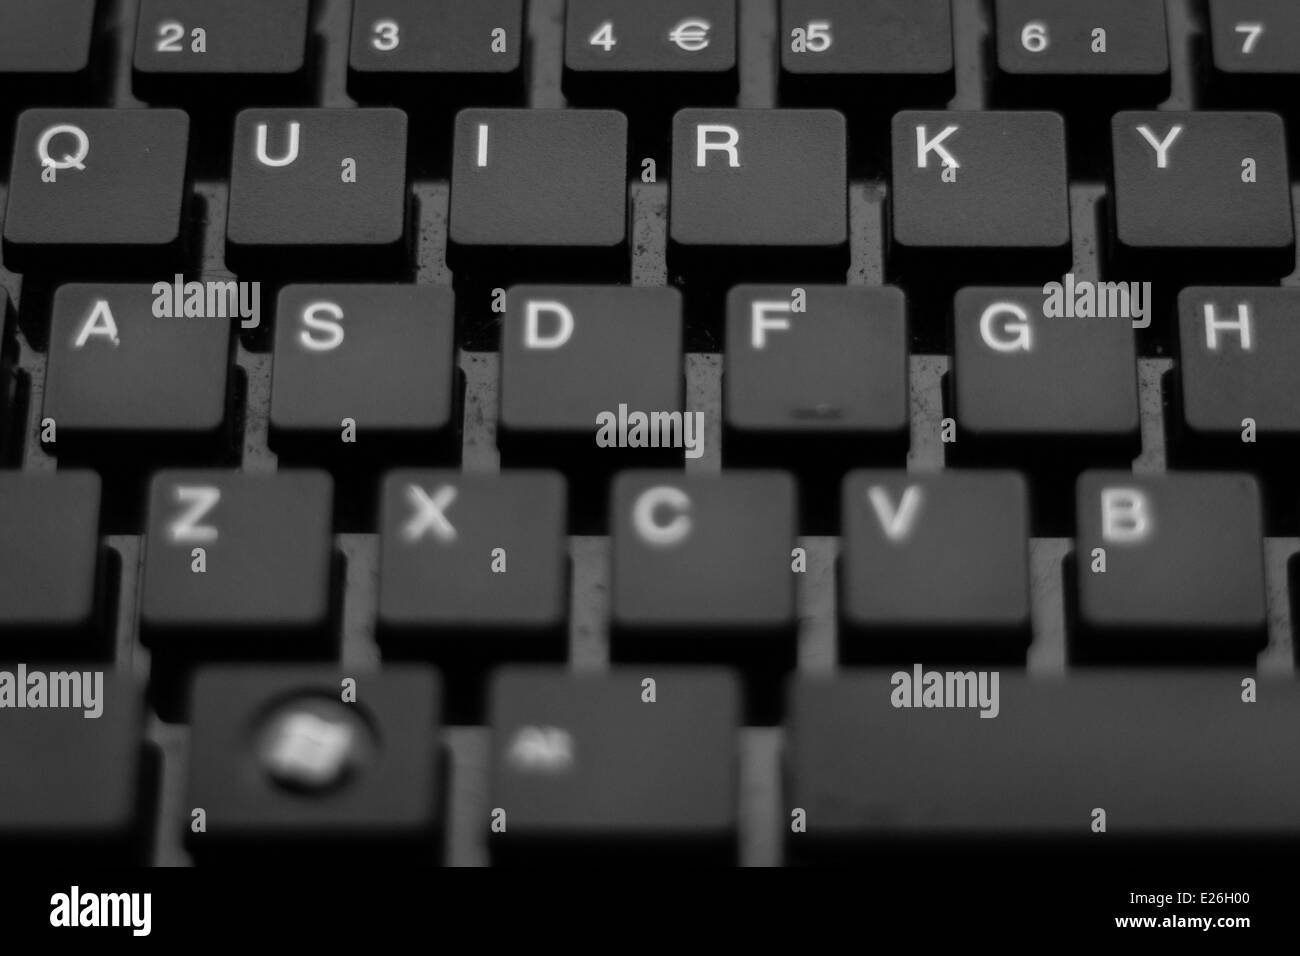 Rearranged letters on a keyboard spelling out the word 'Quirky' where usually the word 'Qwerty' is seen. Stock Photo